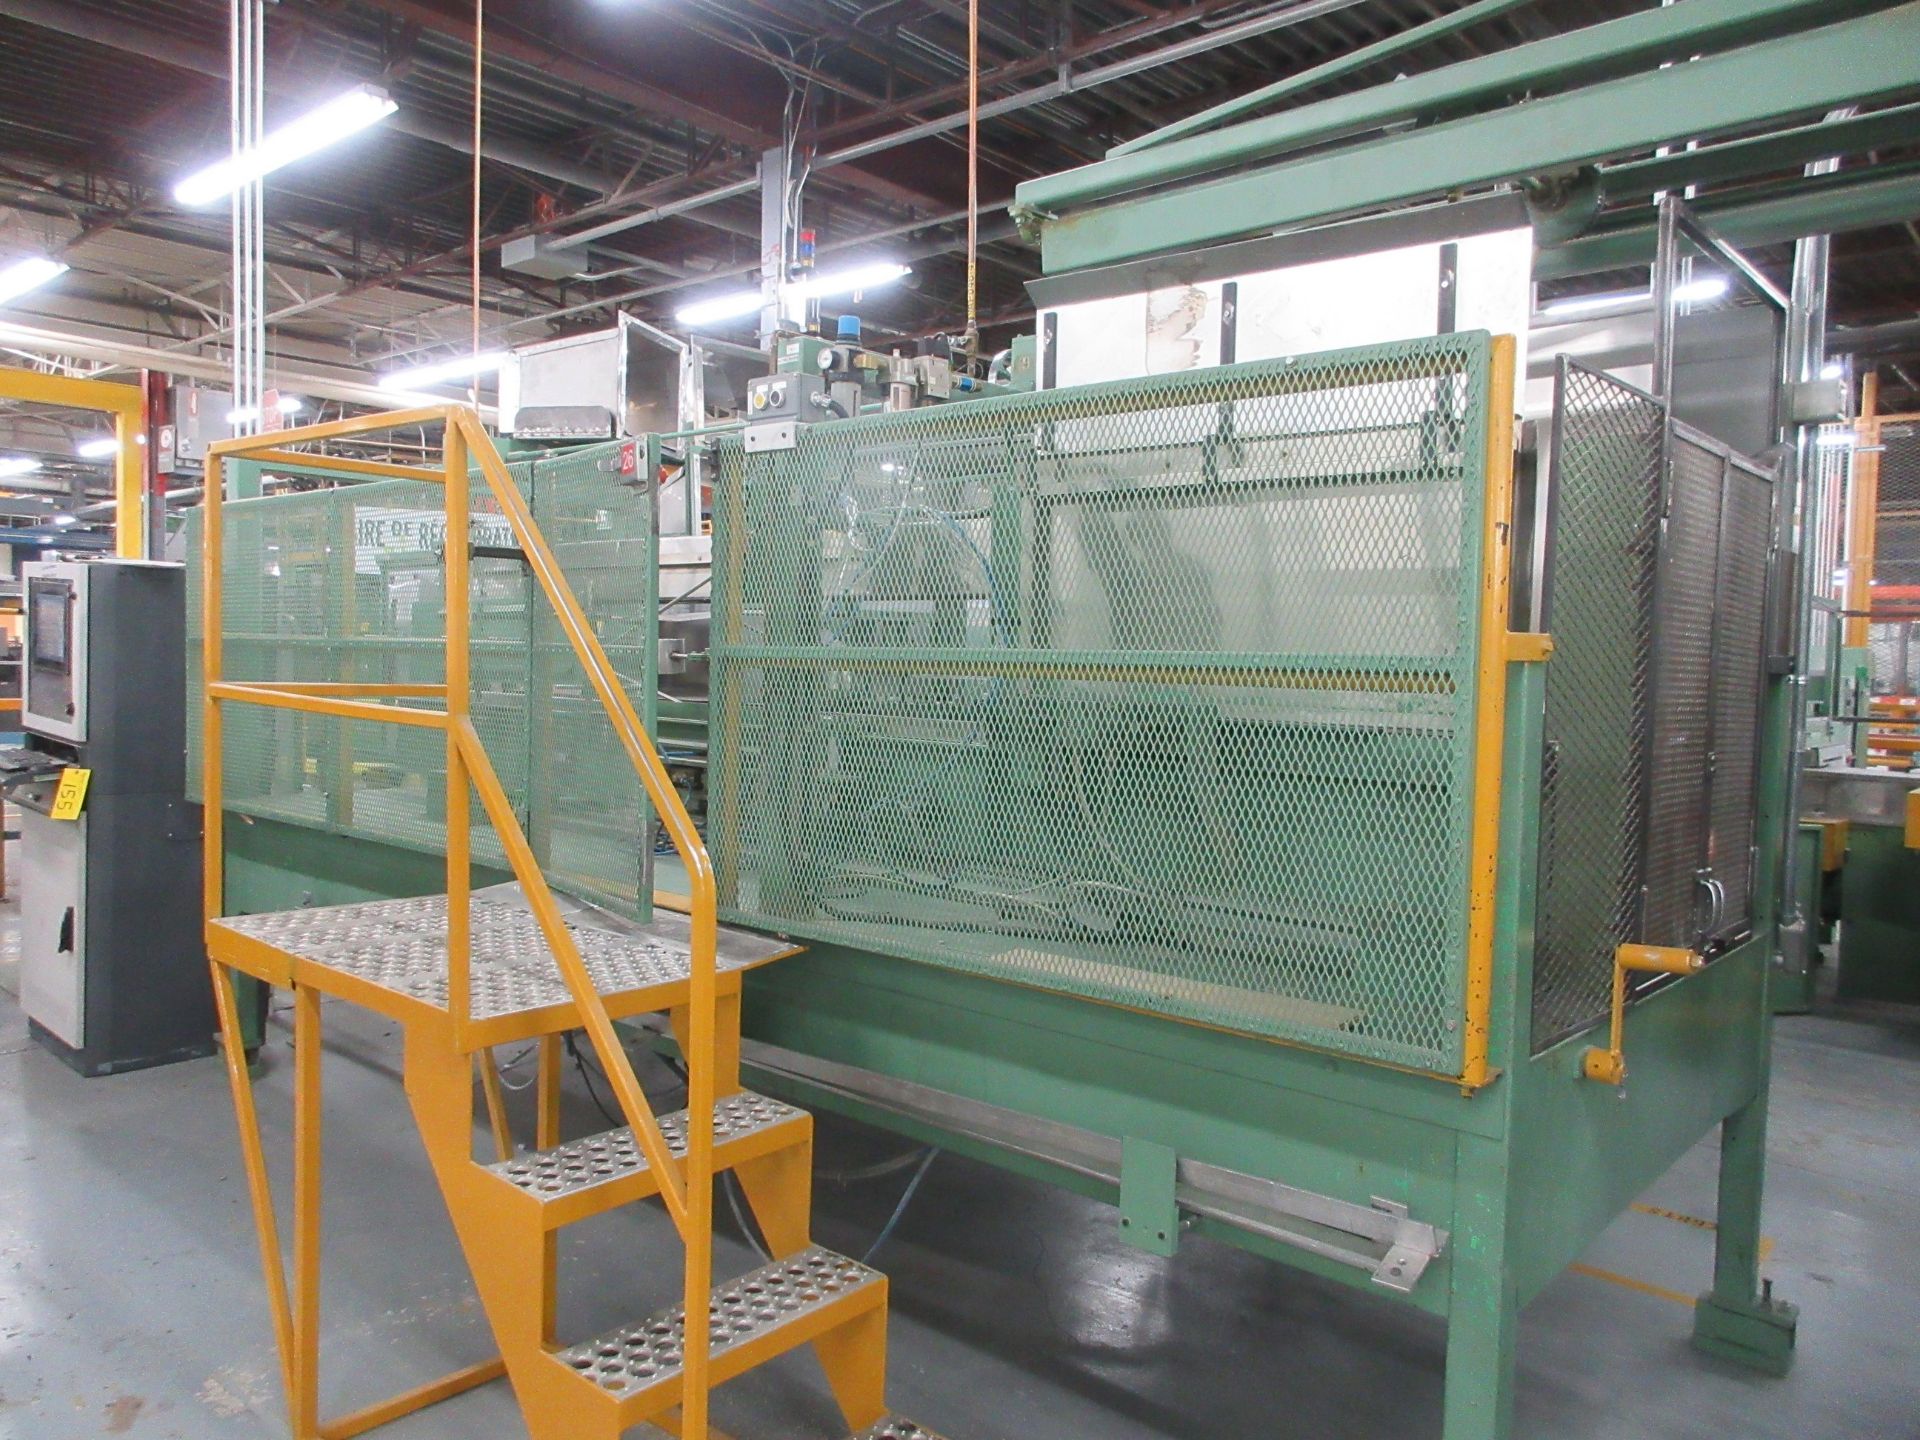 EDSON 1600 CASE PACKER, (1) INFEED LANE, AUTOMATIC MAGAZINE FEEDER, 5CS/MIN MAX CYCLE SPEED, SLC-501 - Image 2 of 2